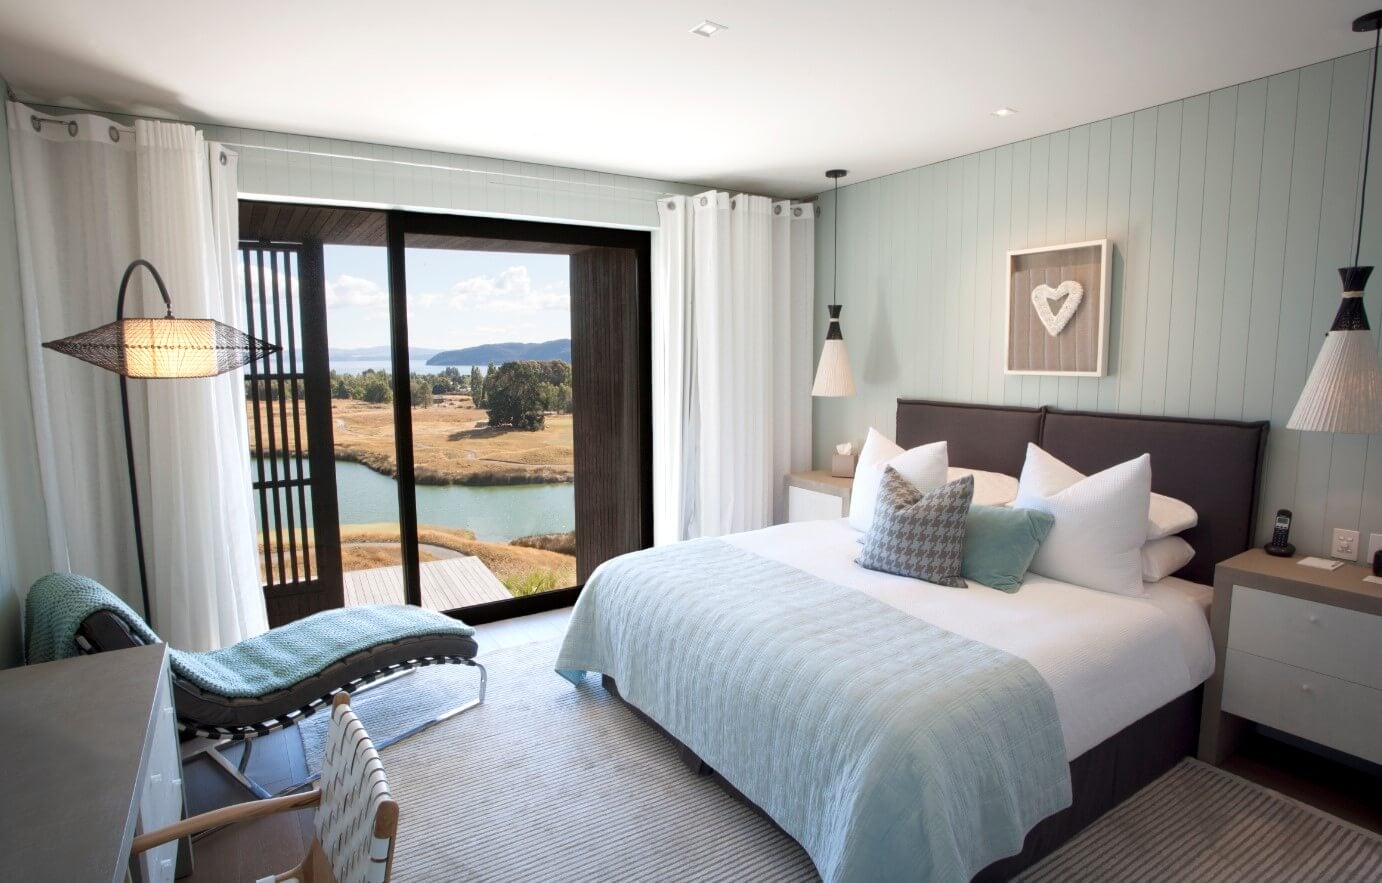 Interior view of a Junior Suite overlooking a lake on The Kinloch Club Golf Course, Taupo